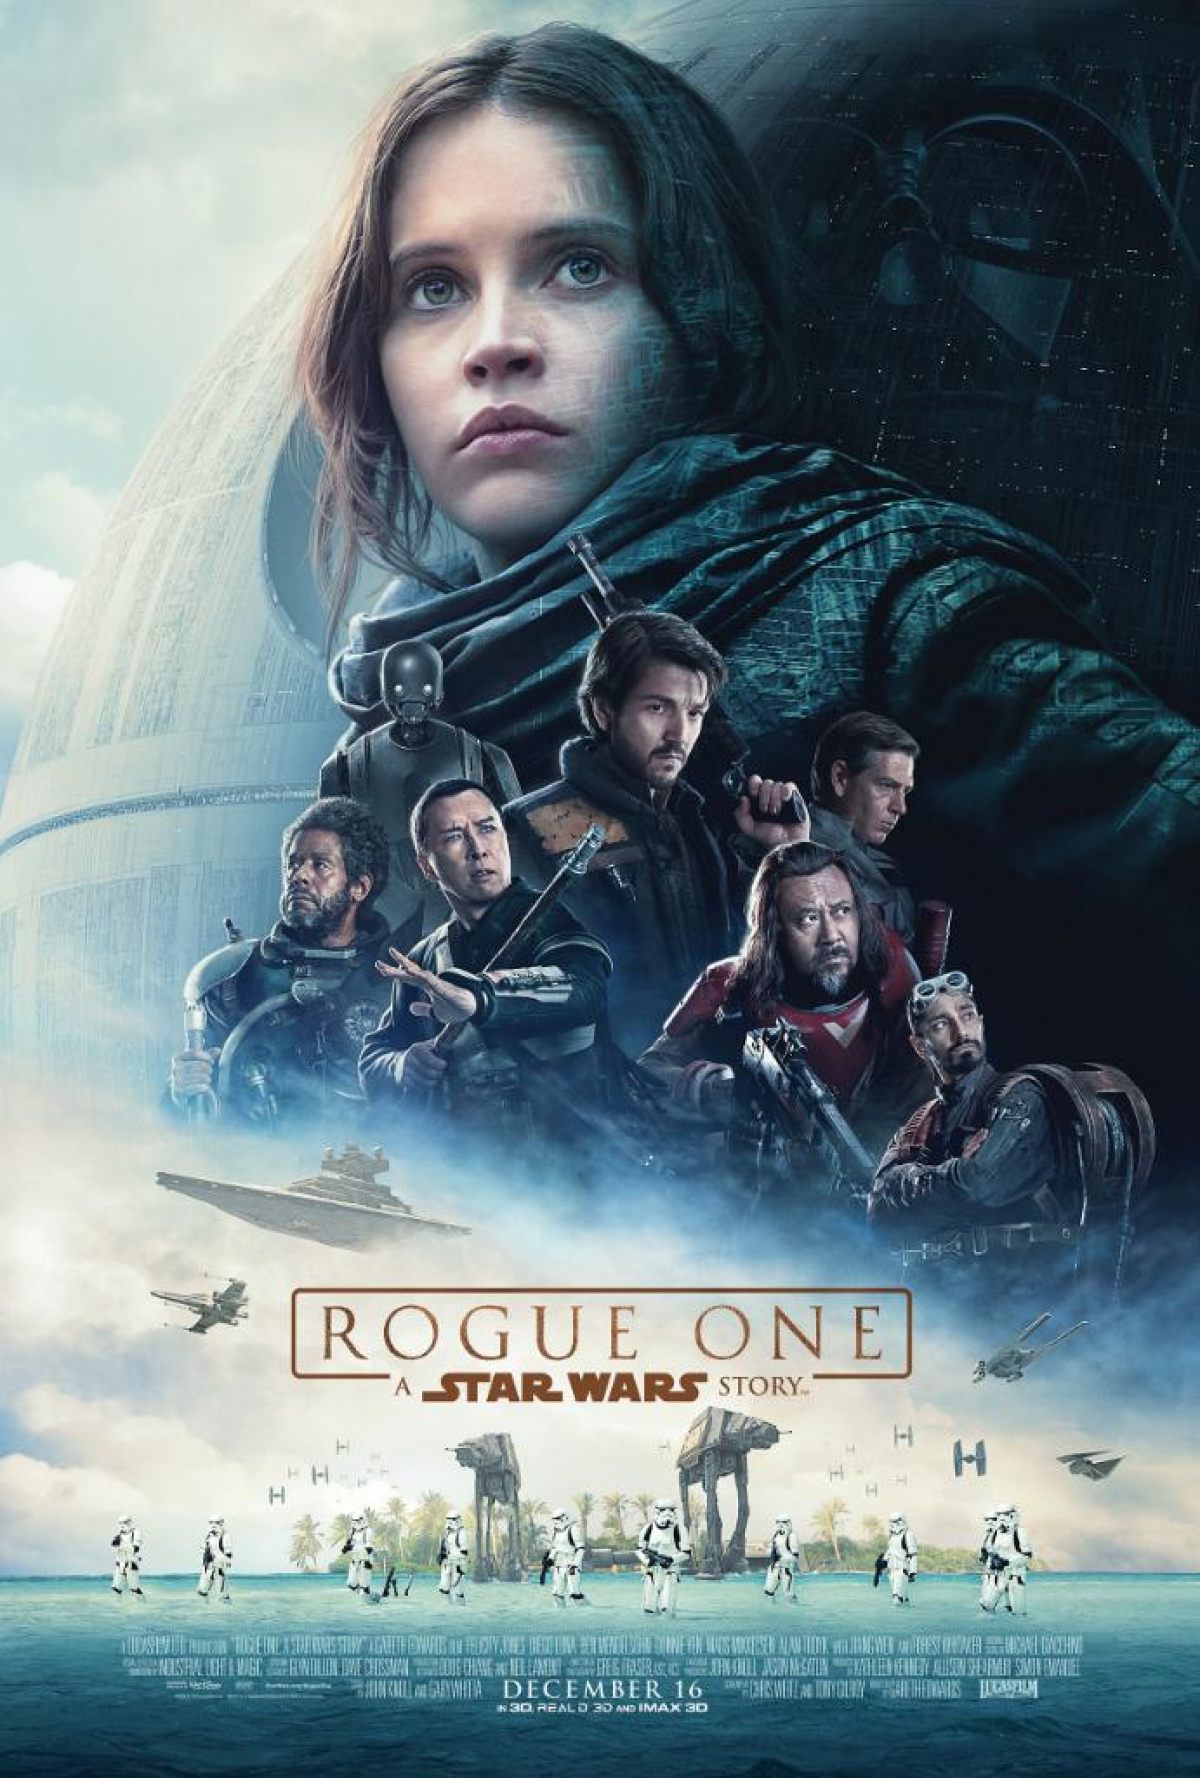 rogue_one_poster_222_1200_1778_81_s.jpg